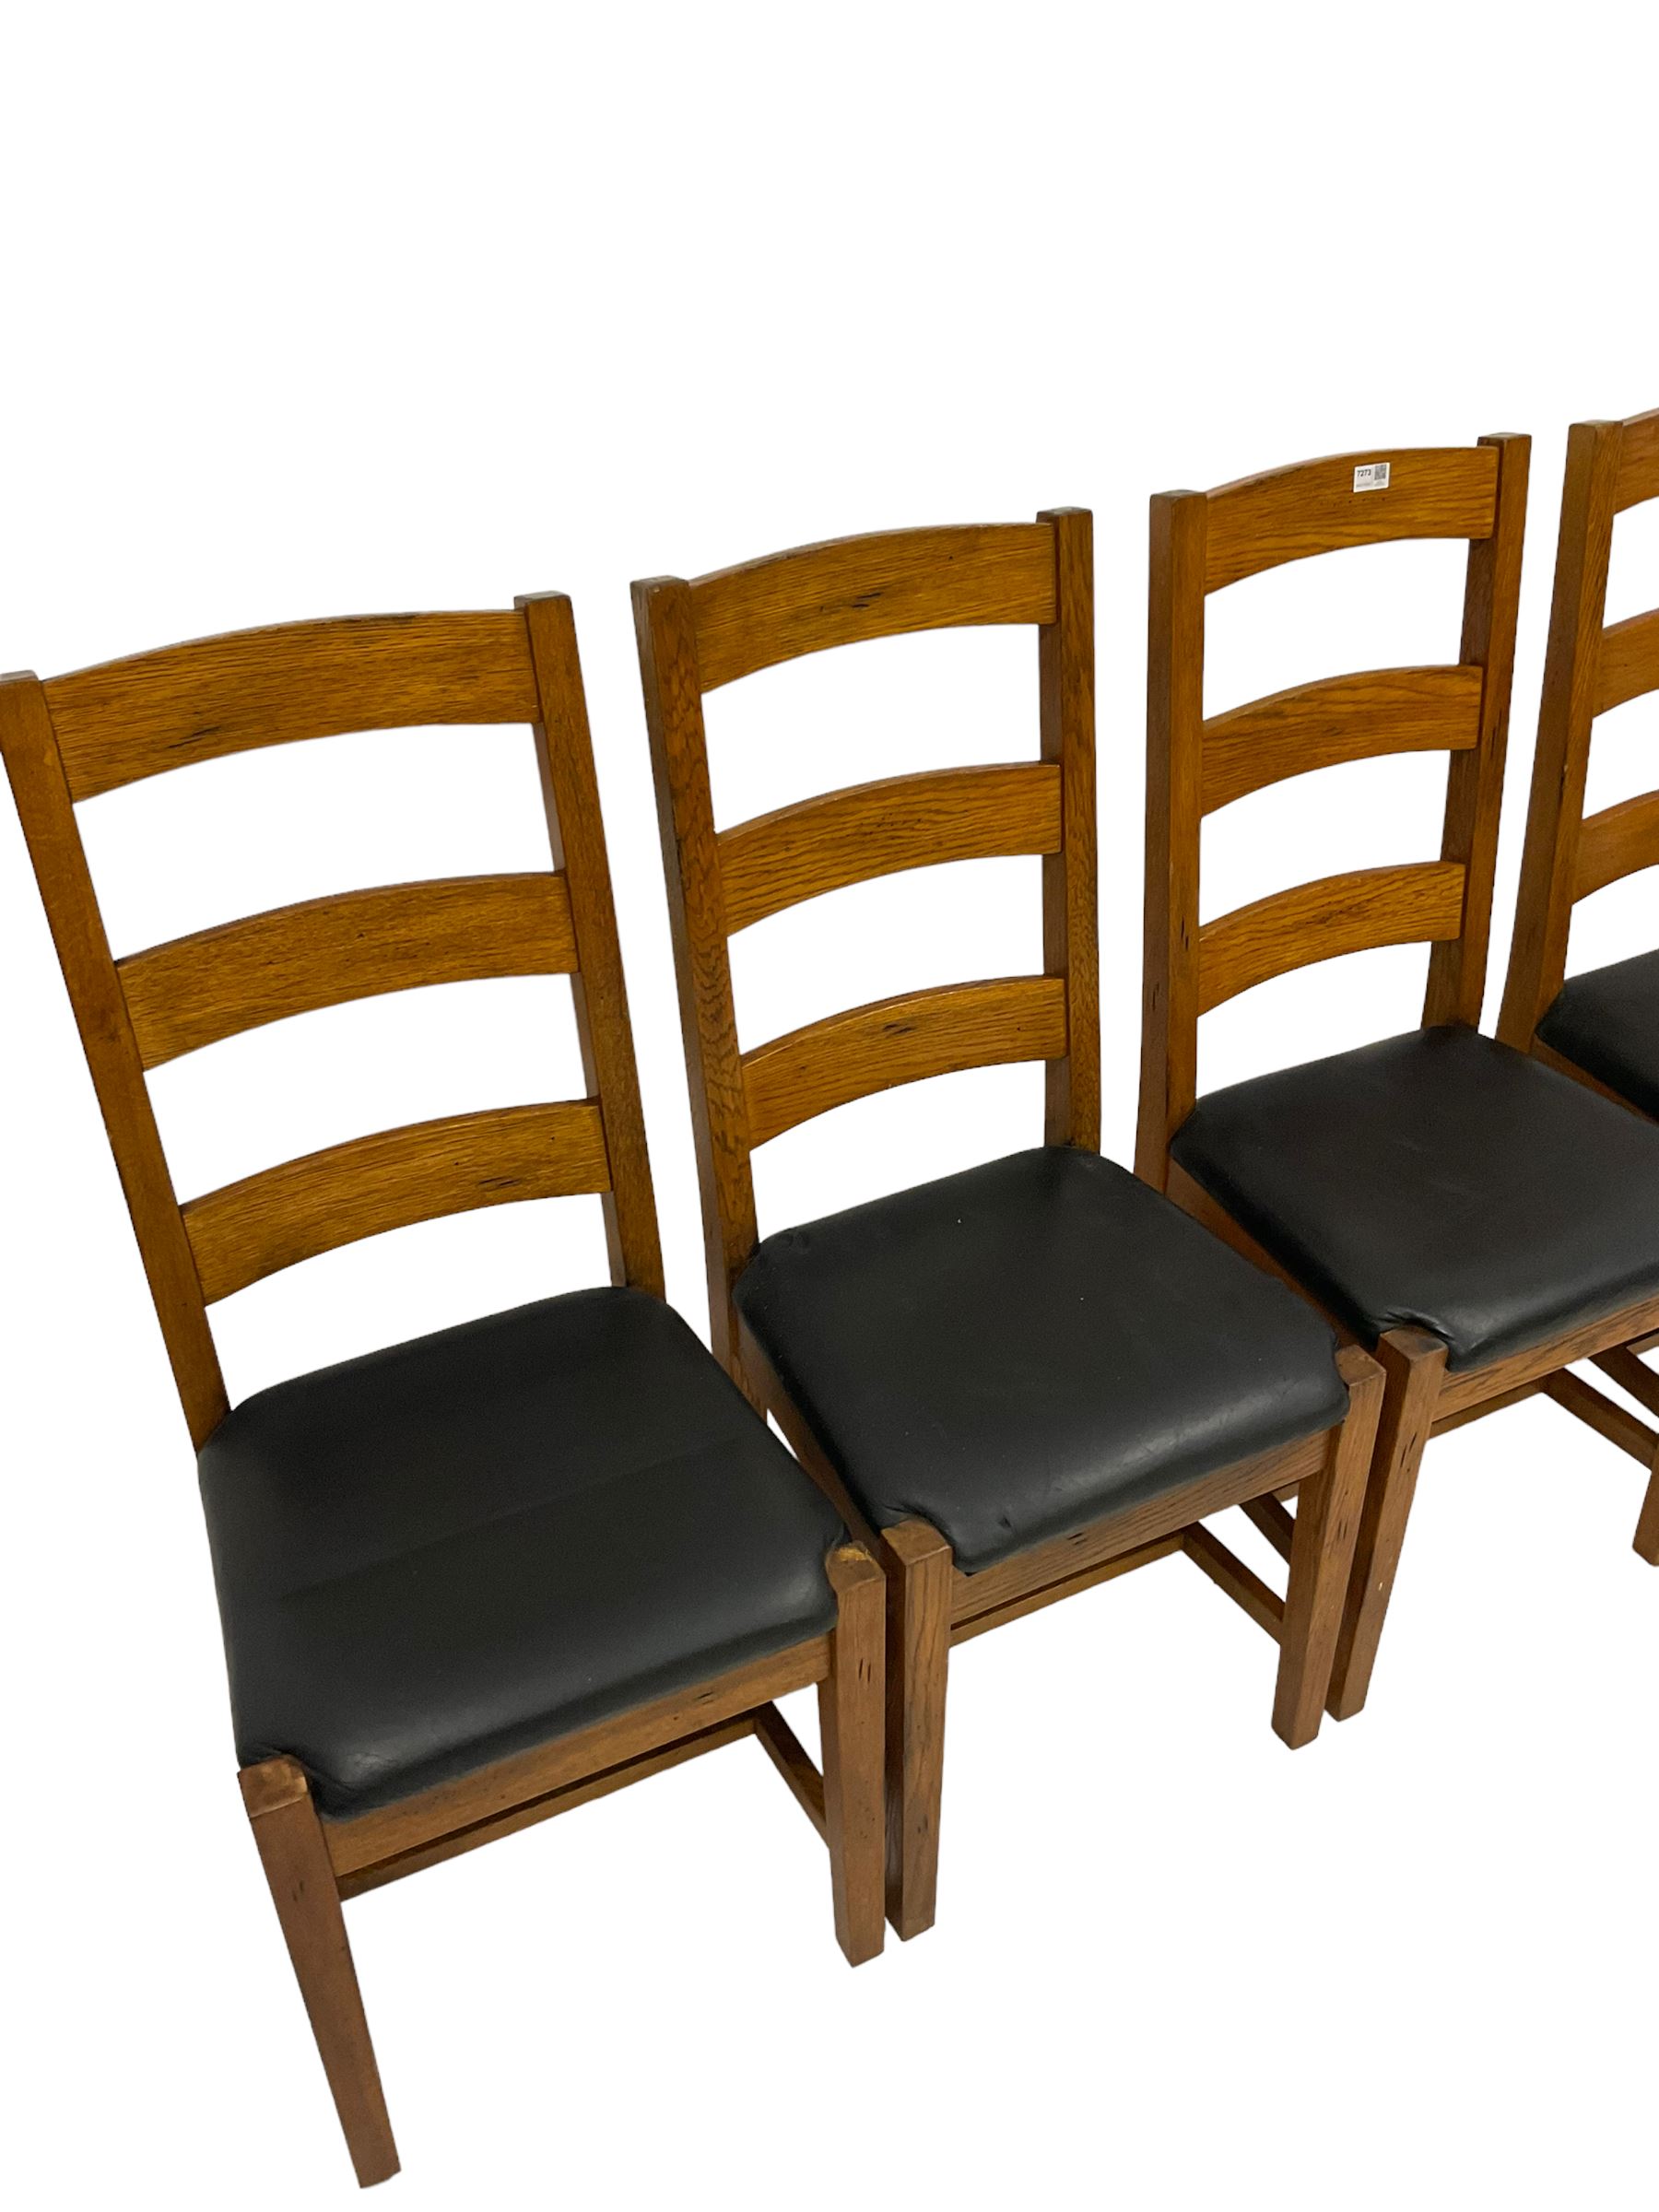 Set four of oak dining chairs with upholstered seat pads - Image 2 of 3